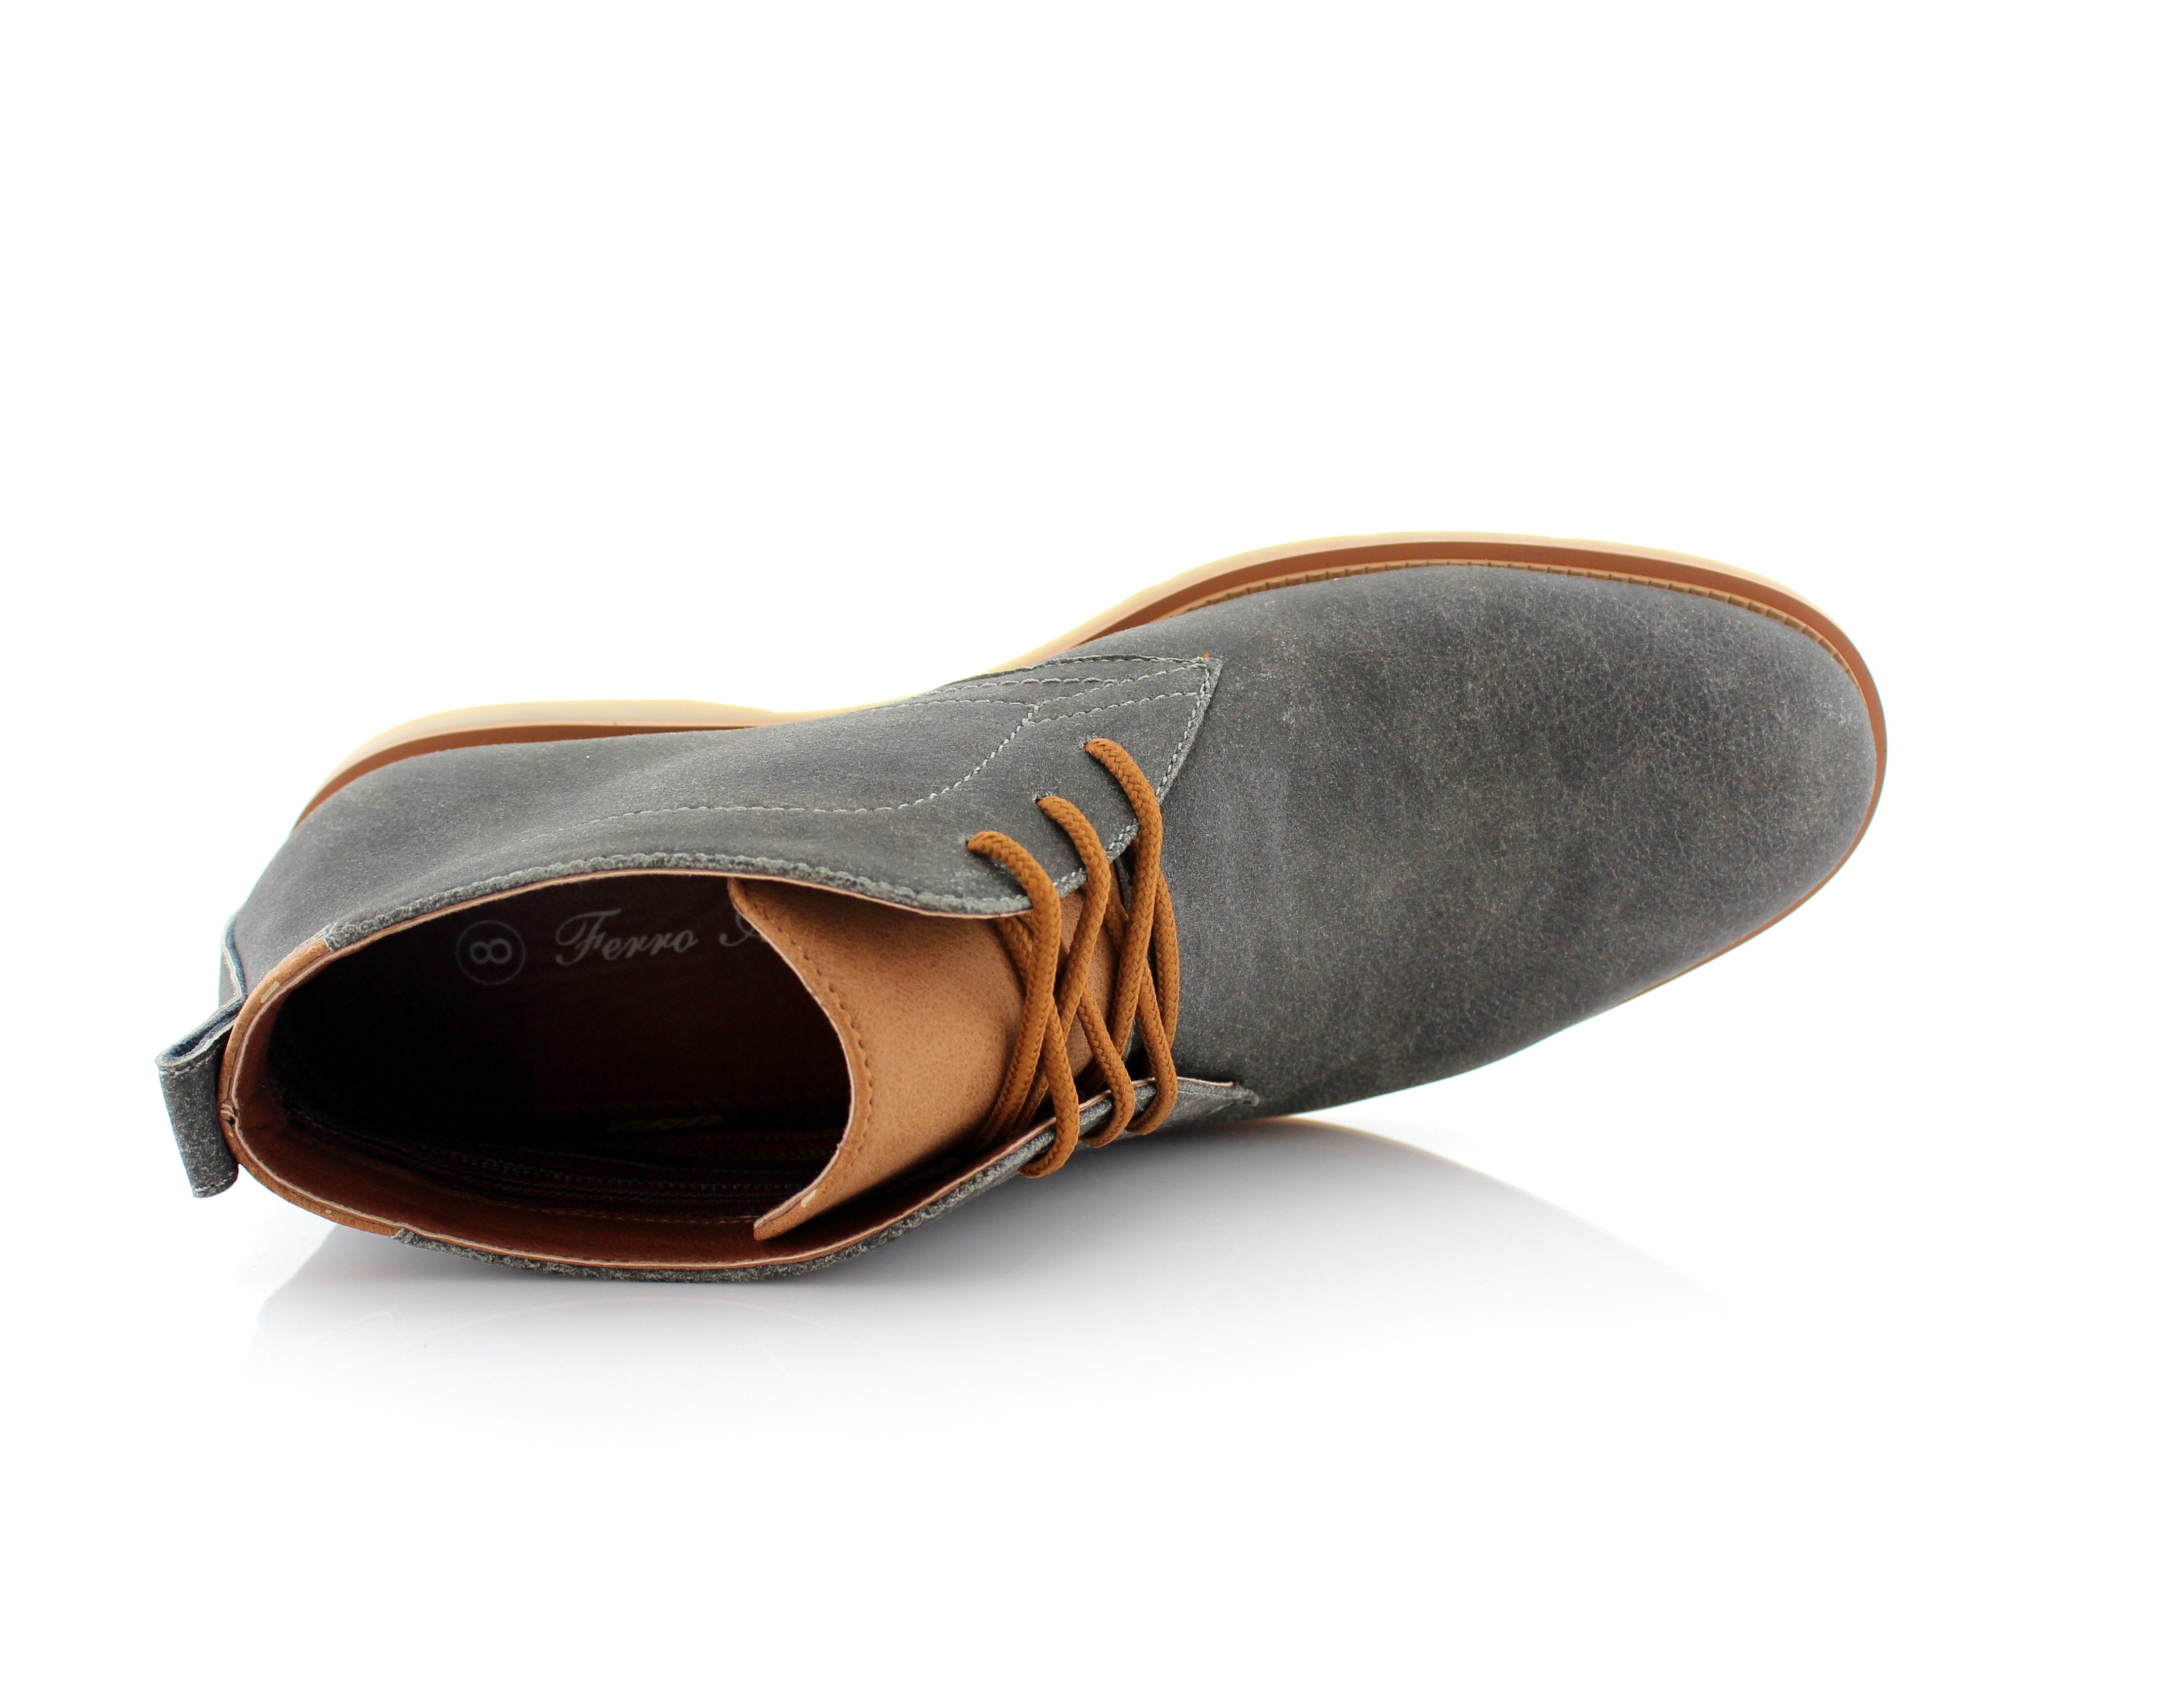 Two-Toned Chukka Boots | Marvin by Ferro Aldo | Conal Footwear | Top-Down Angle View